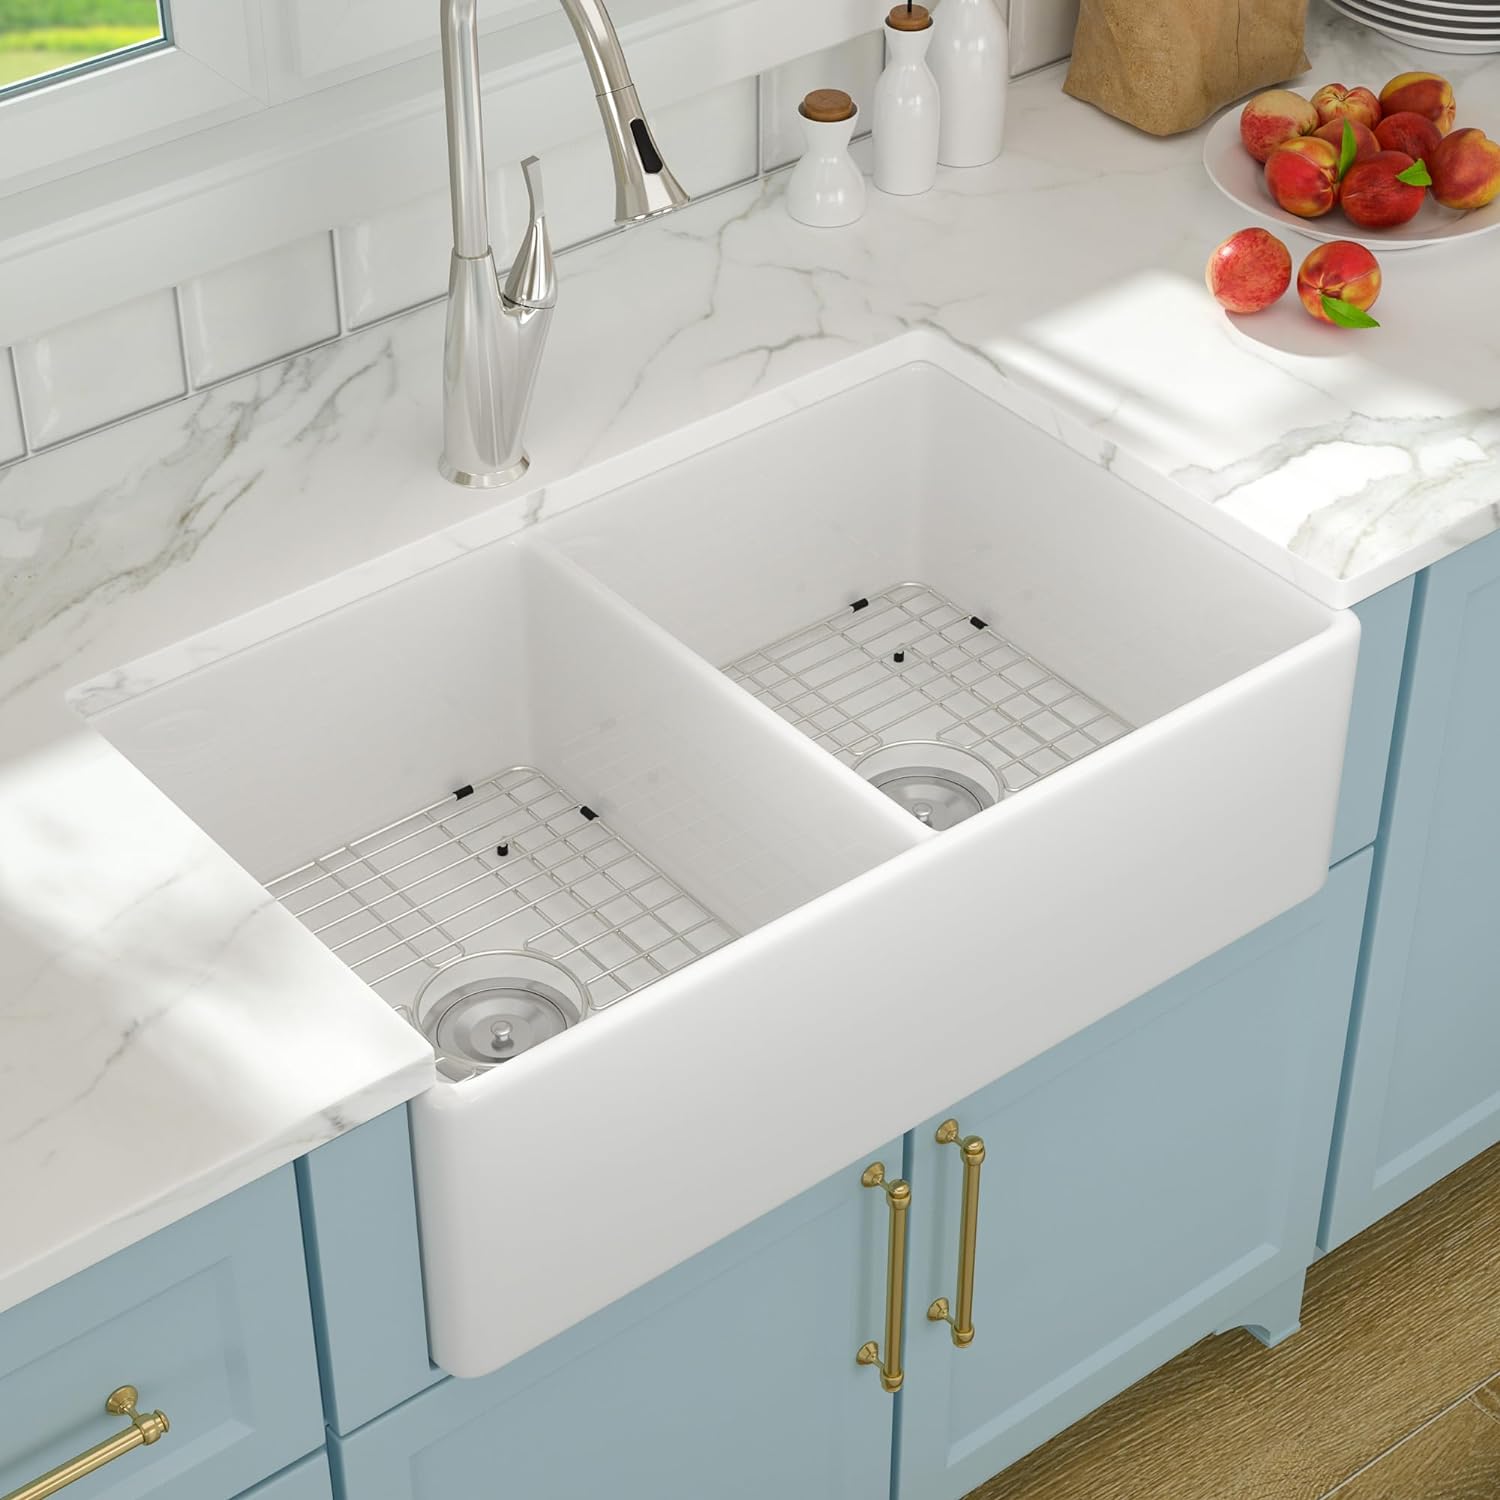 Lordear 33x20 Inch Farmhouse Sinks Double Basin Pure White Fireclay Porcelain Ceramic Apron Front Farm Sink 33 Inch 50/50 Double Kitchen Sink | Kitchen Apron Front Sink, Kitchen Farmhouse Sink | Lordear